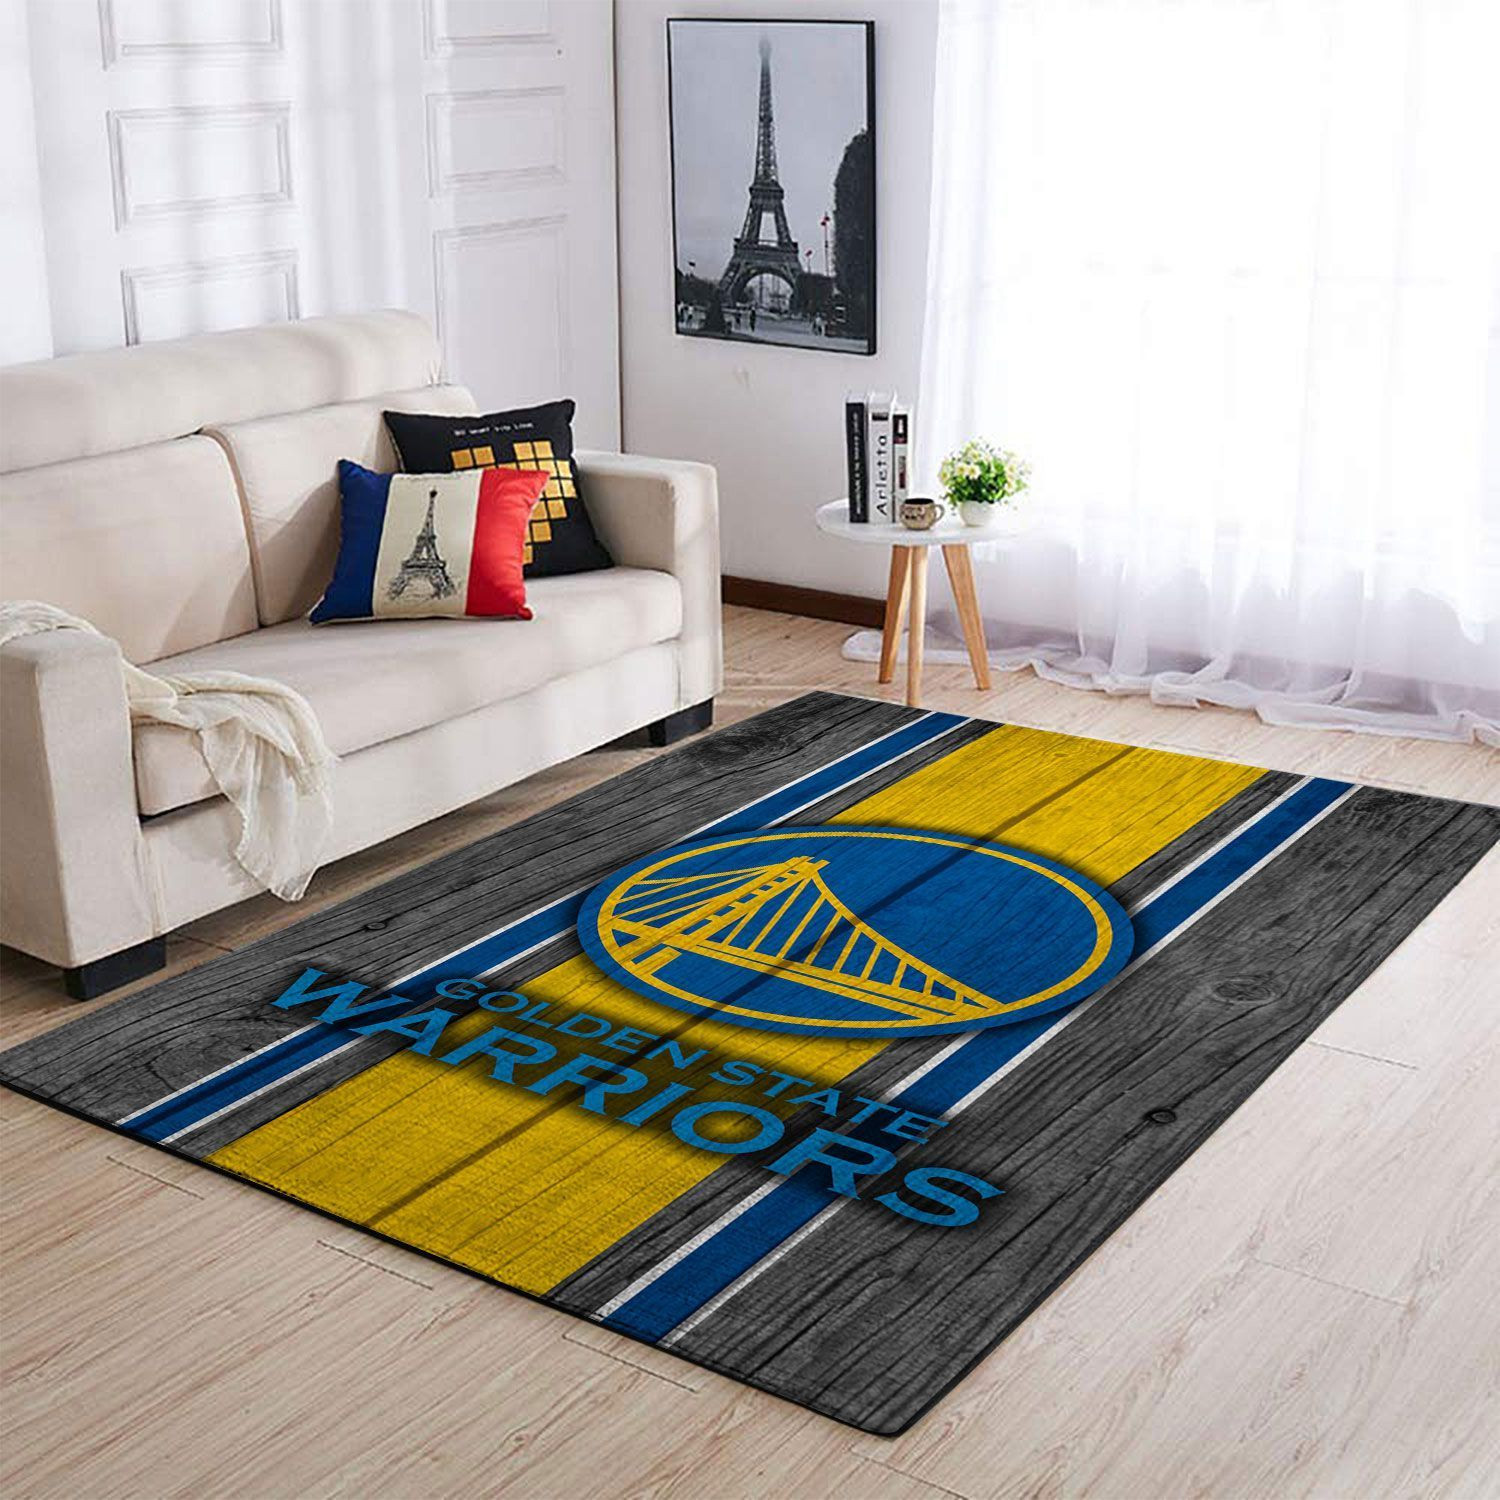 Rugs in Living Room and Bedroom - Golden state warriors nba team logo wooden style nice gift home decor rectangle area rug